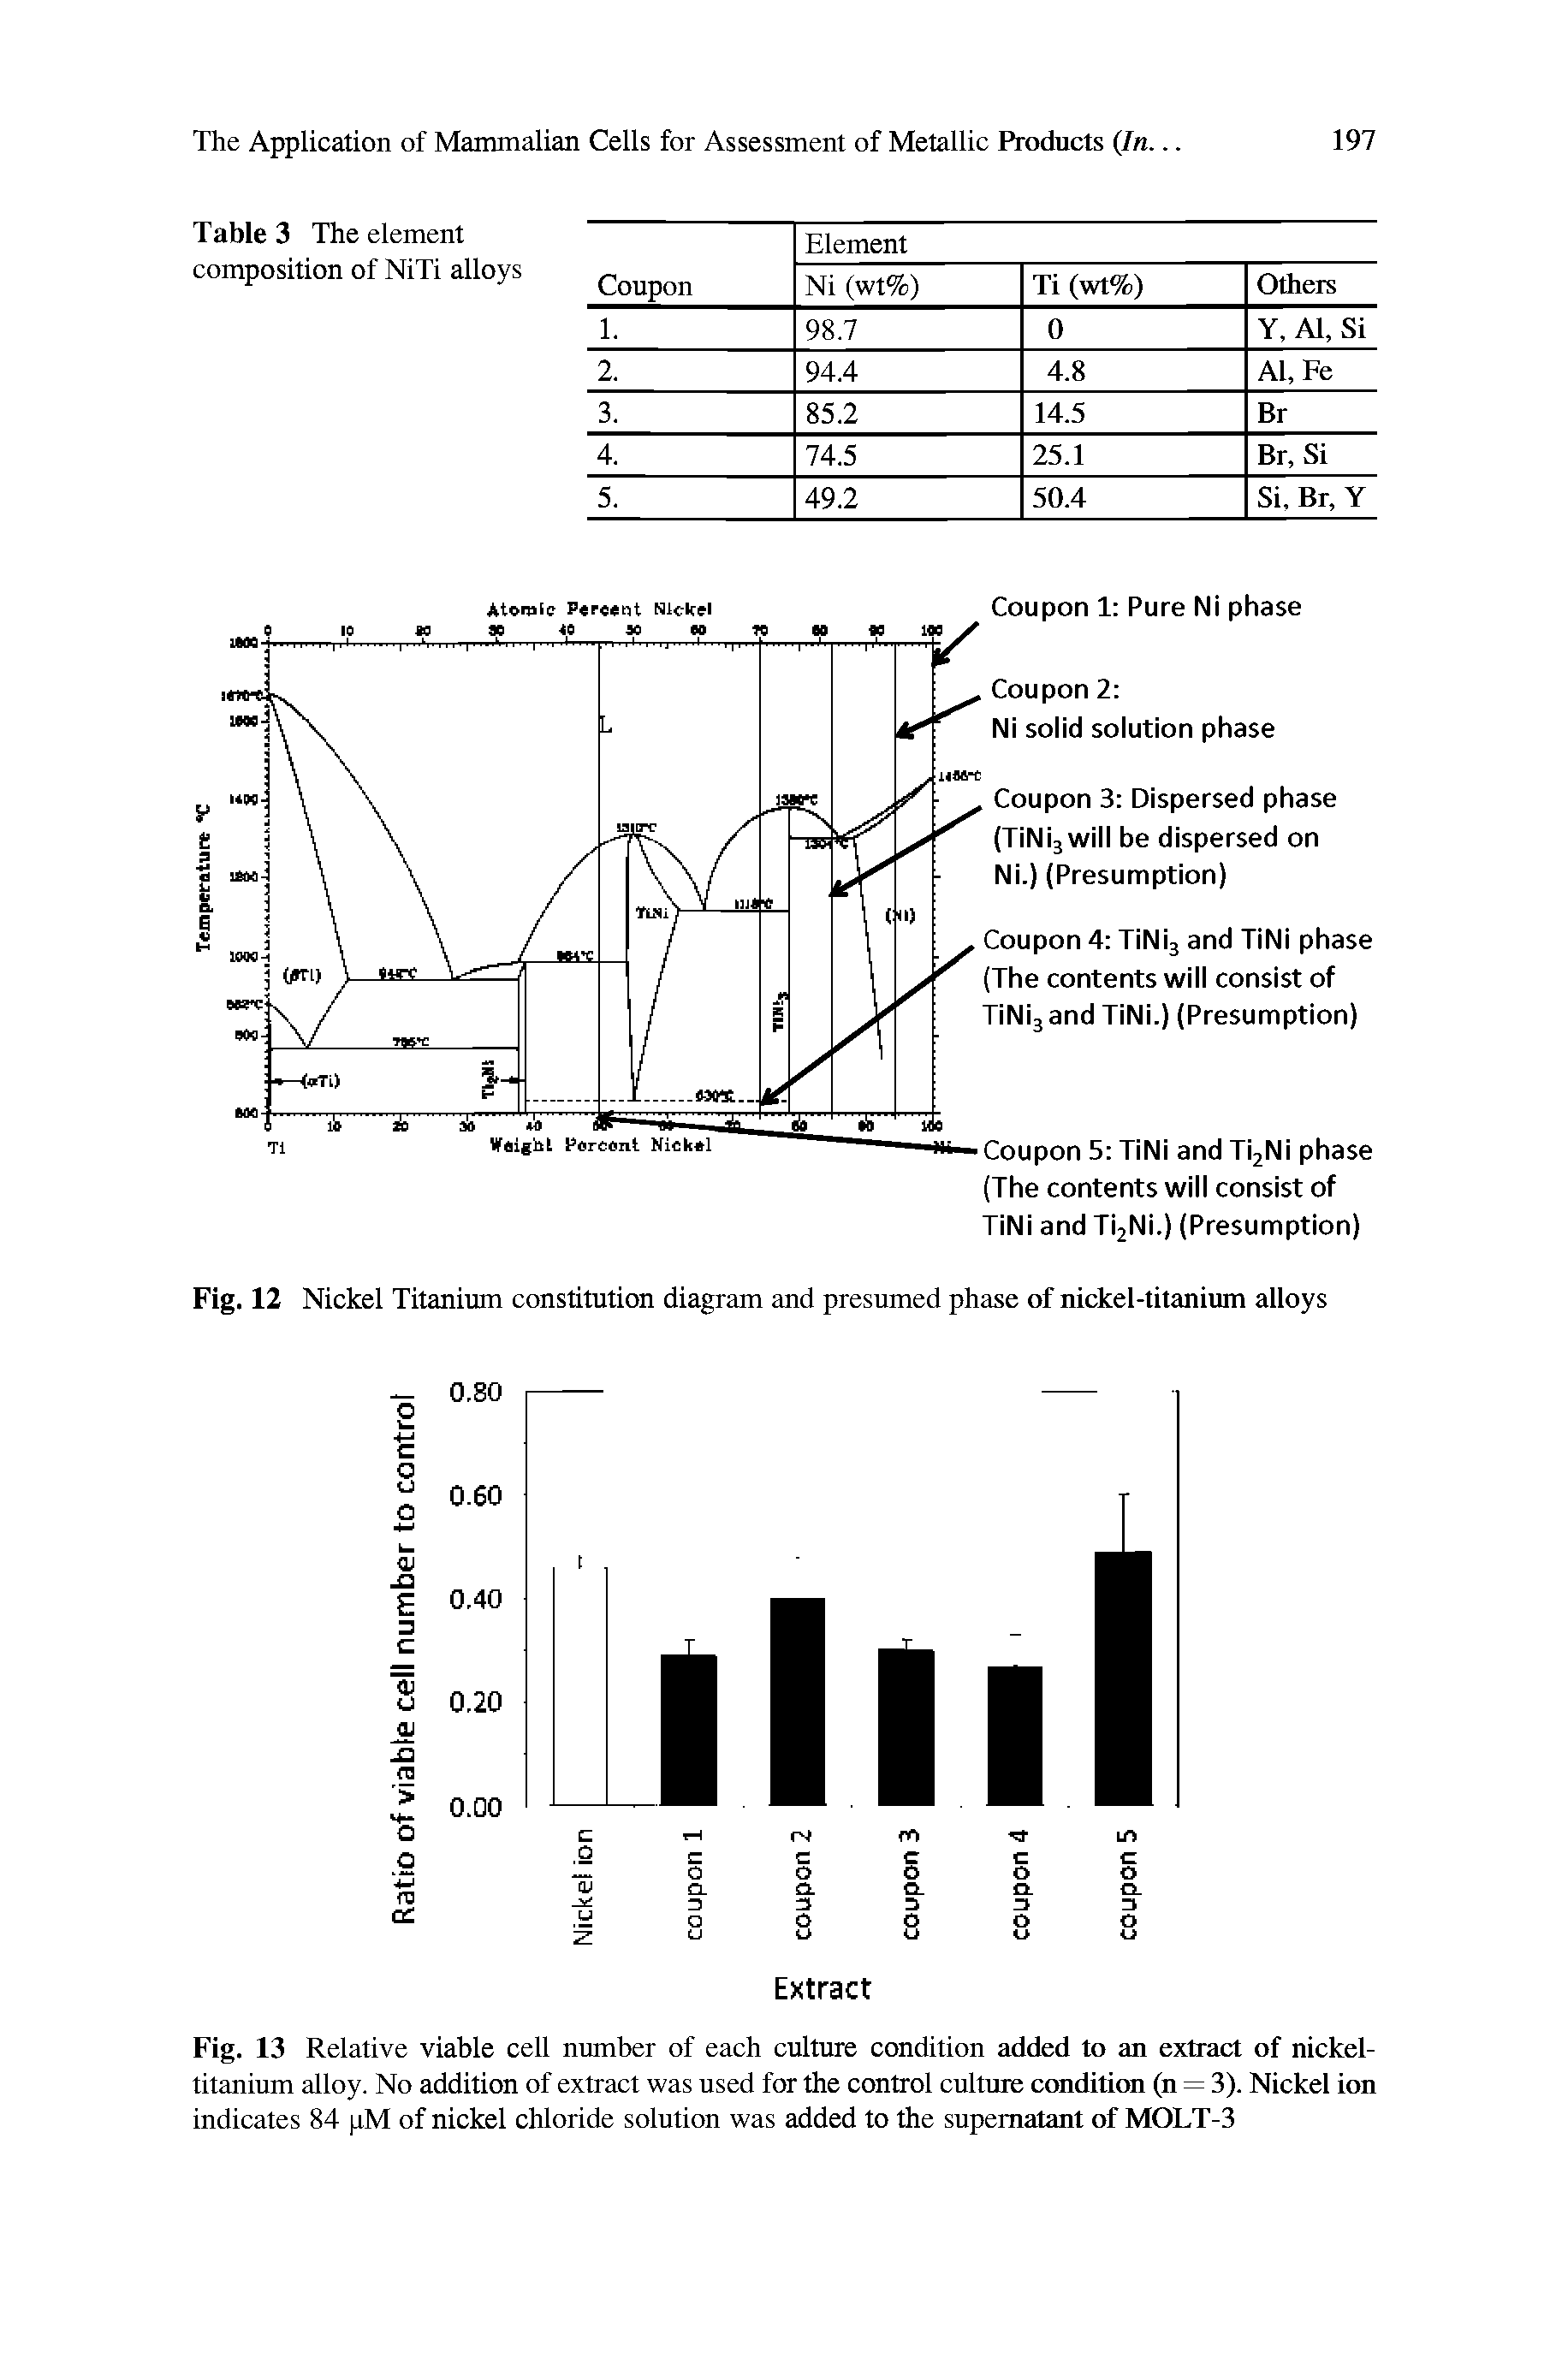 Fig. 13 Relative viable cell number of each culture condition added to an extract of nickel-titanium alloy. No addition of extract was used for the control culture ctmditirai (n = 3). Nickel ion indicates 84 pM of nickel chloride solution was added to the supernatant of MOLT-3...